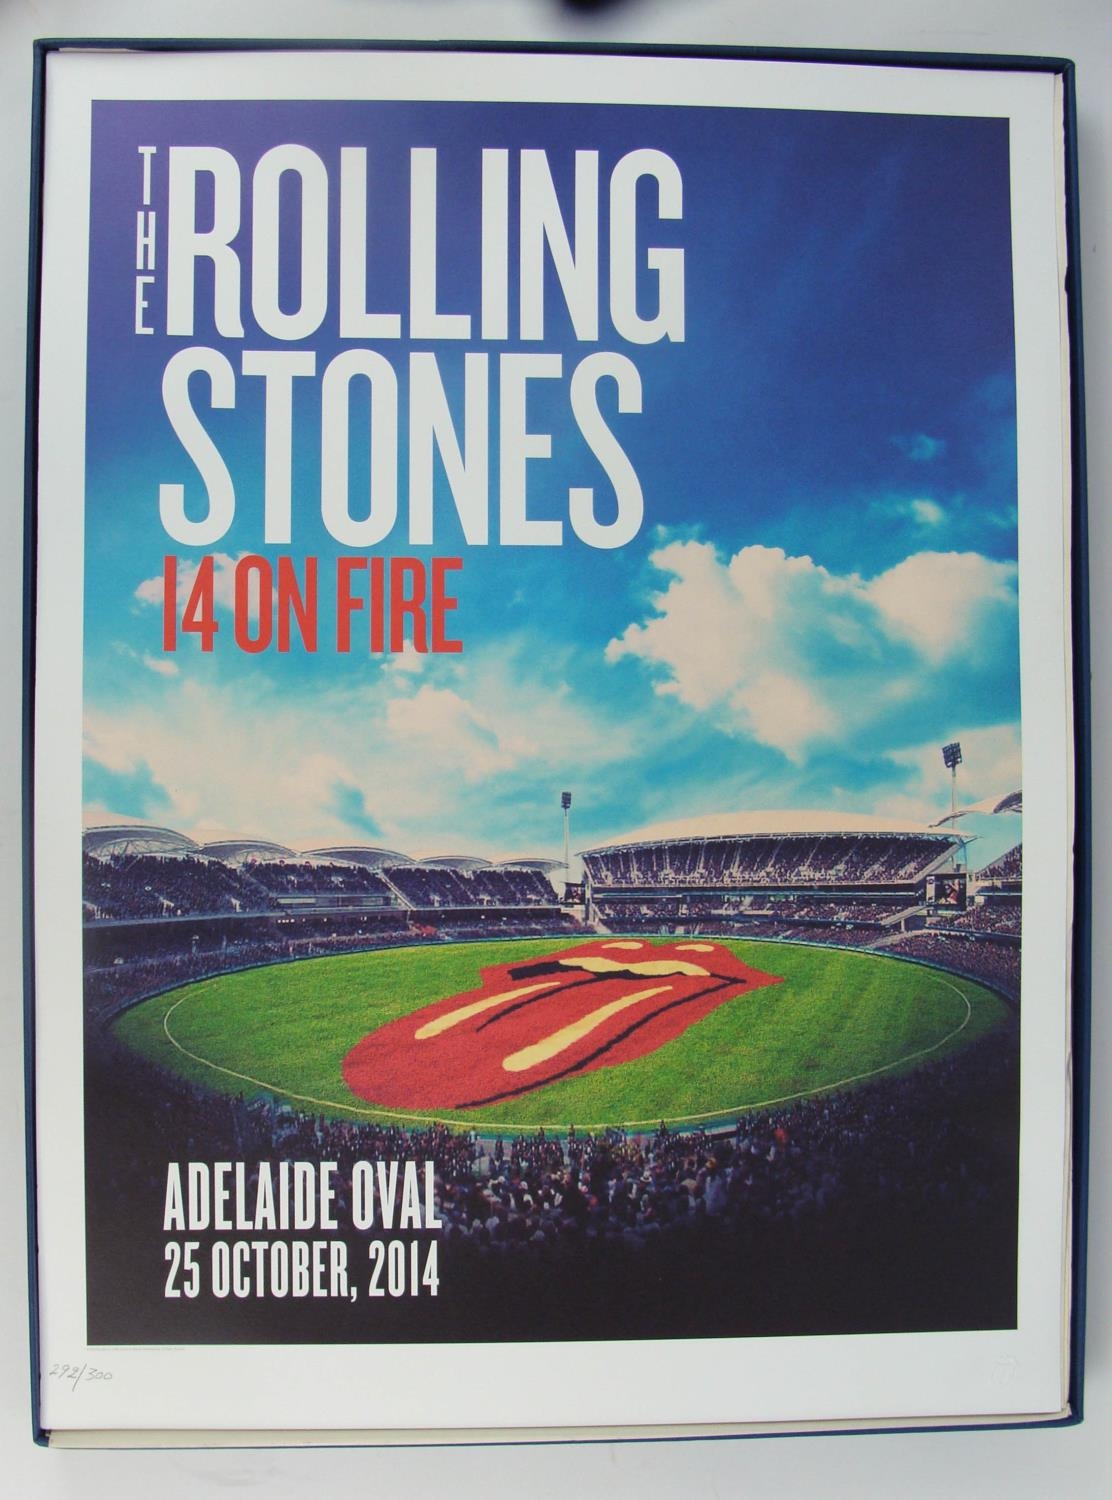 ROLLING STONES '14 on FIRE' BOX SET, of 13 lithographic posters from the 2014 Australia and New - Image 11 of 21